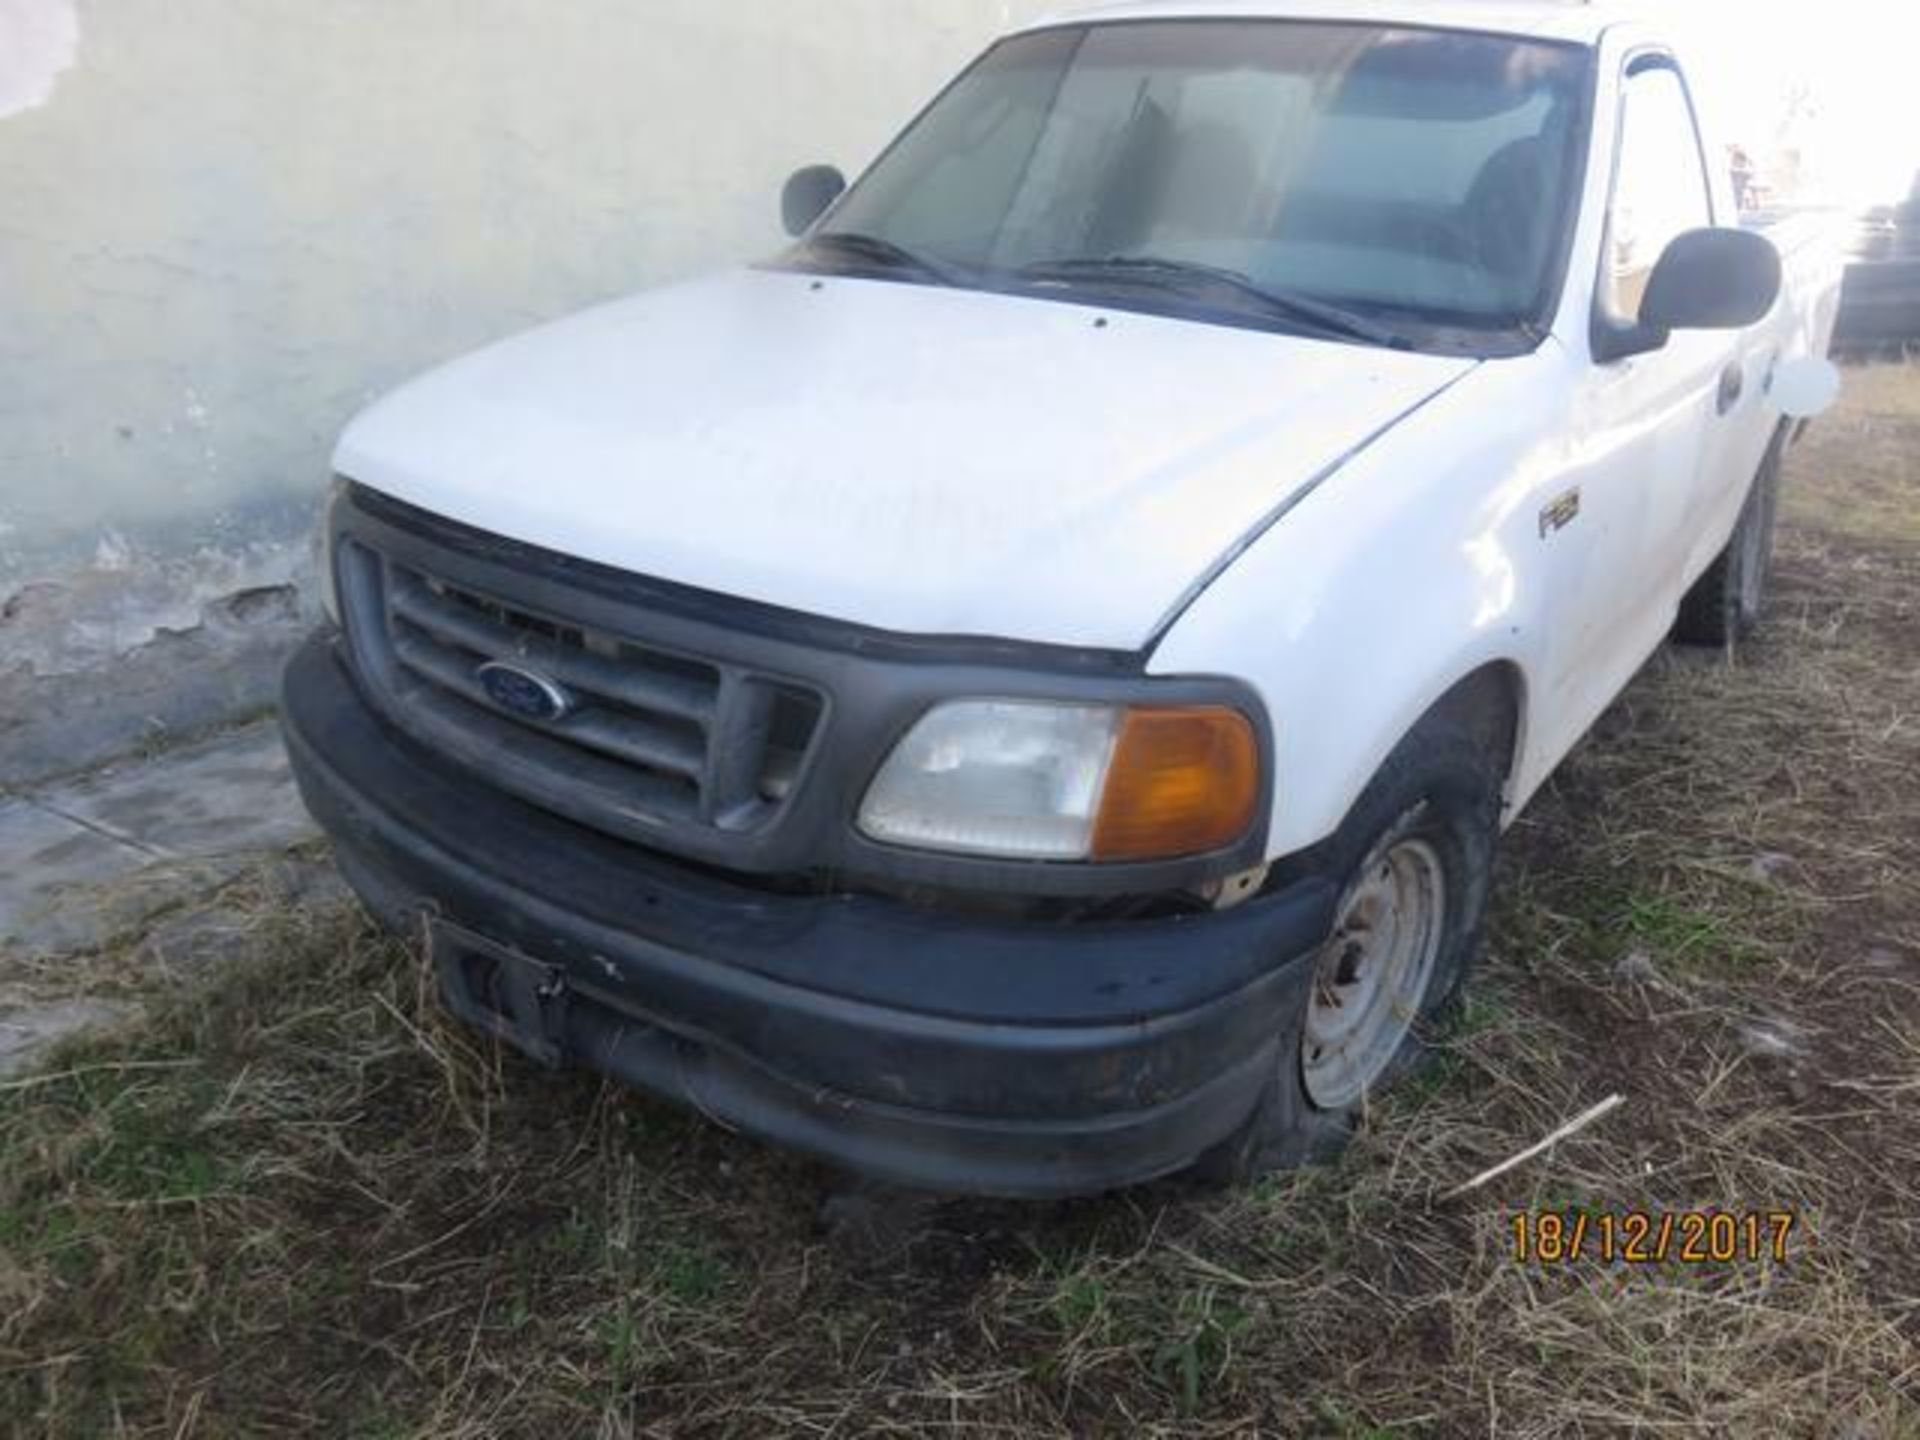 Vehiculo Marca Ford, Linea F-150, Tipo Pick Up, Modelo 2008., Located In: Durango, Deposit Of: $